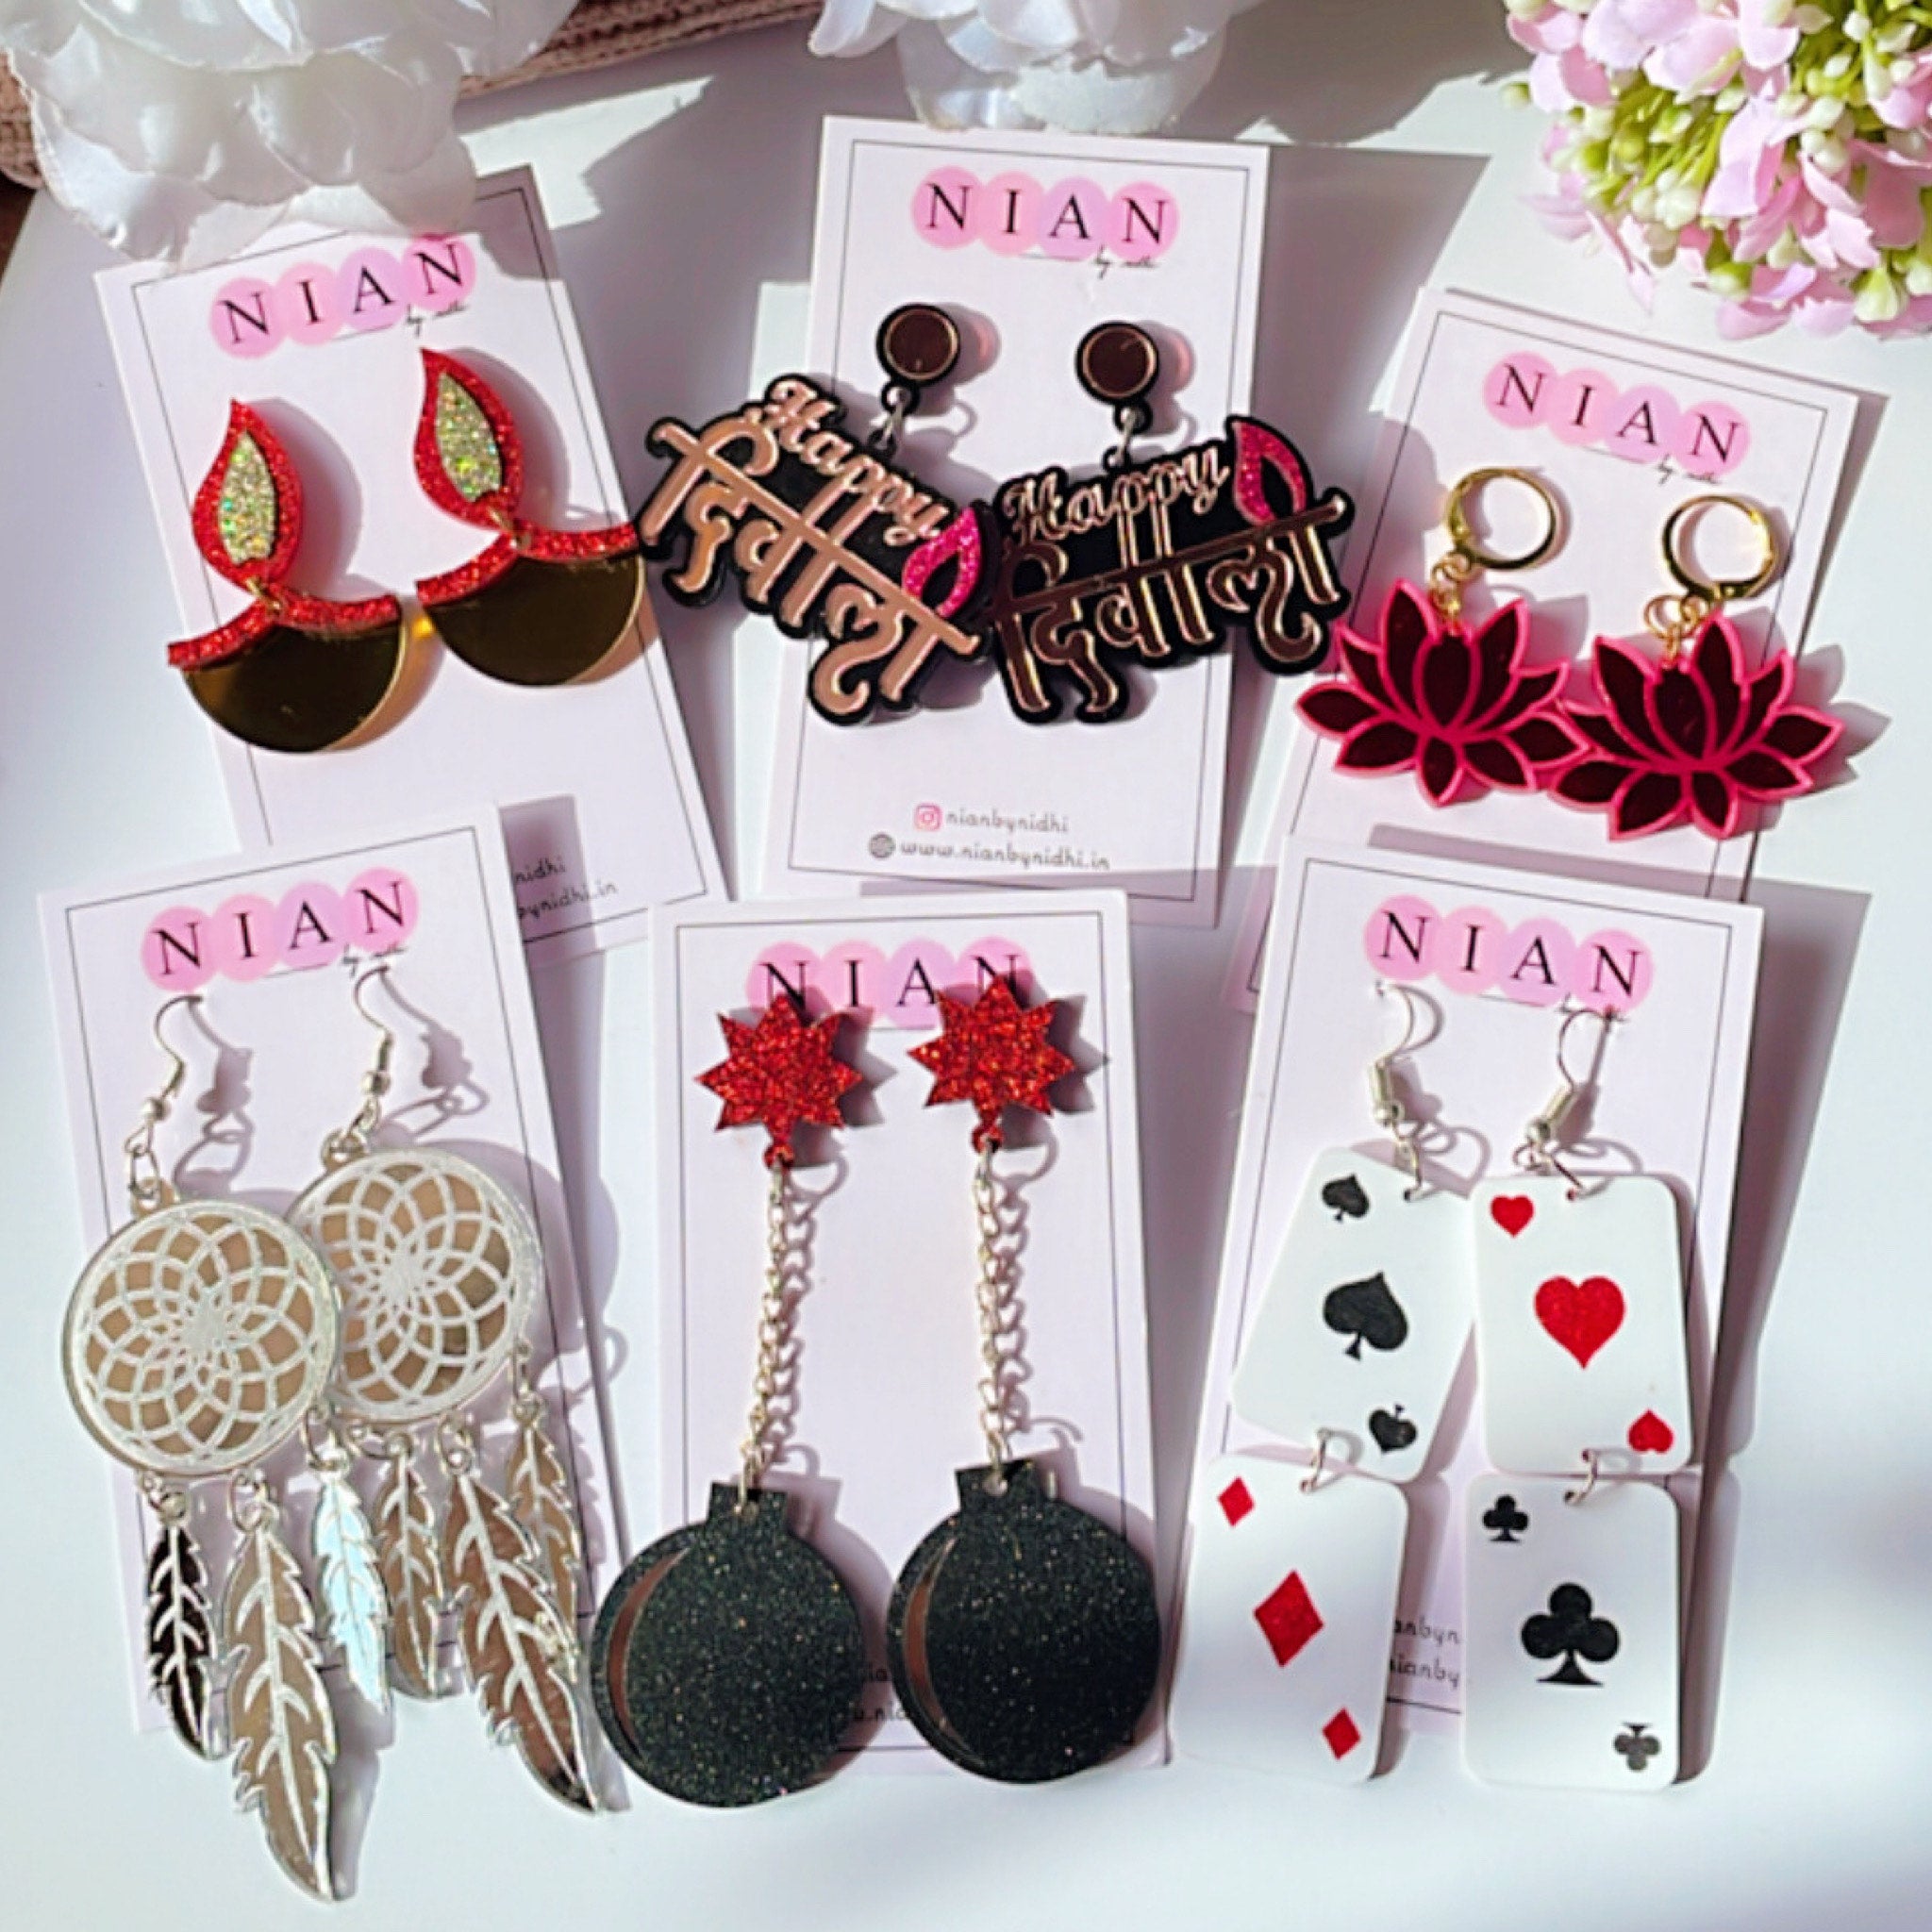 Diwali Diva Collection (Set of 6 earrings) - Nian by Nidhi - placed in a white background. Consists the following 6 earrings - Dazzling Diya, Happy Diwali, Lotus Danglers, Dreamcatcher, Pataka, Poker